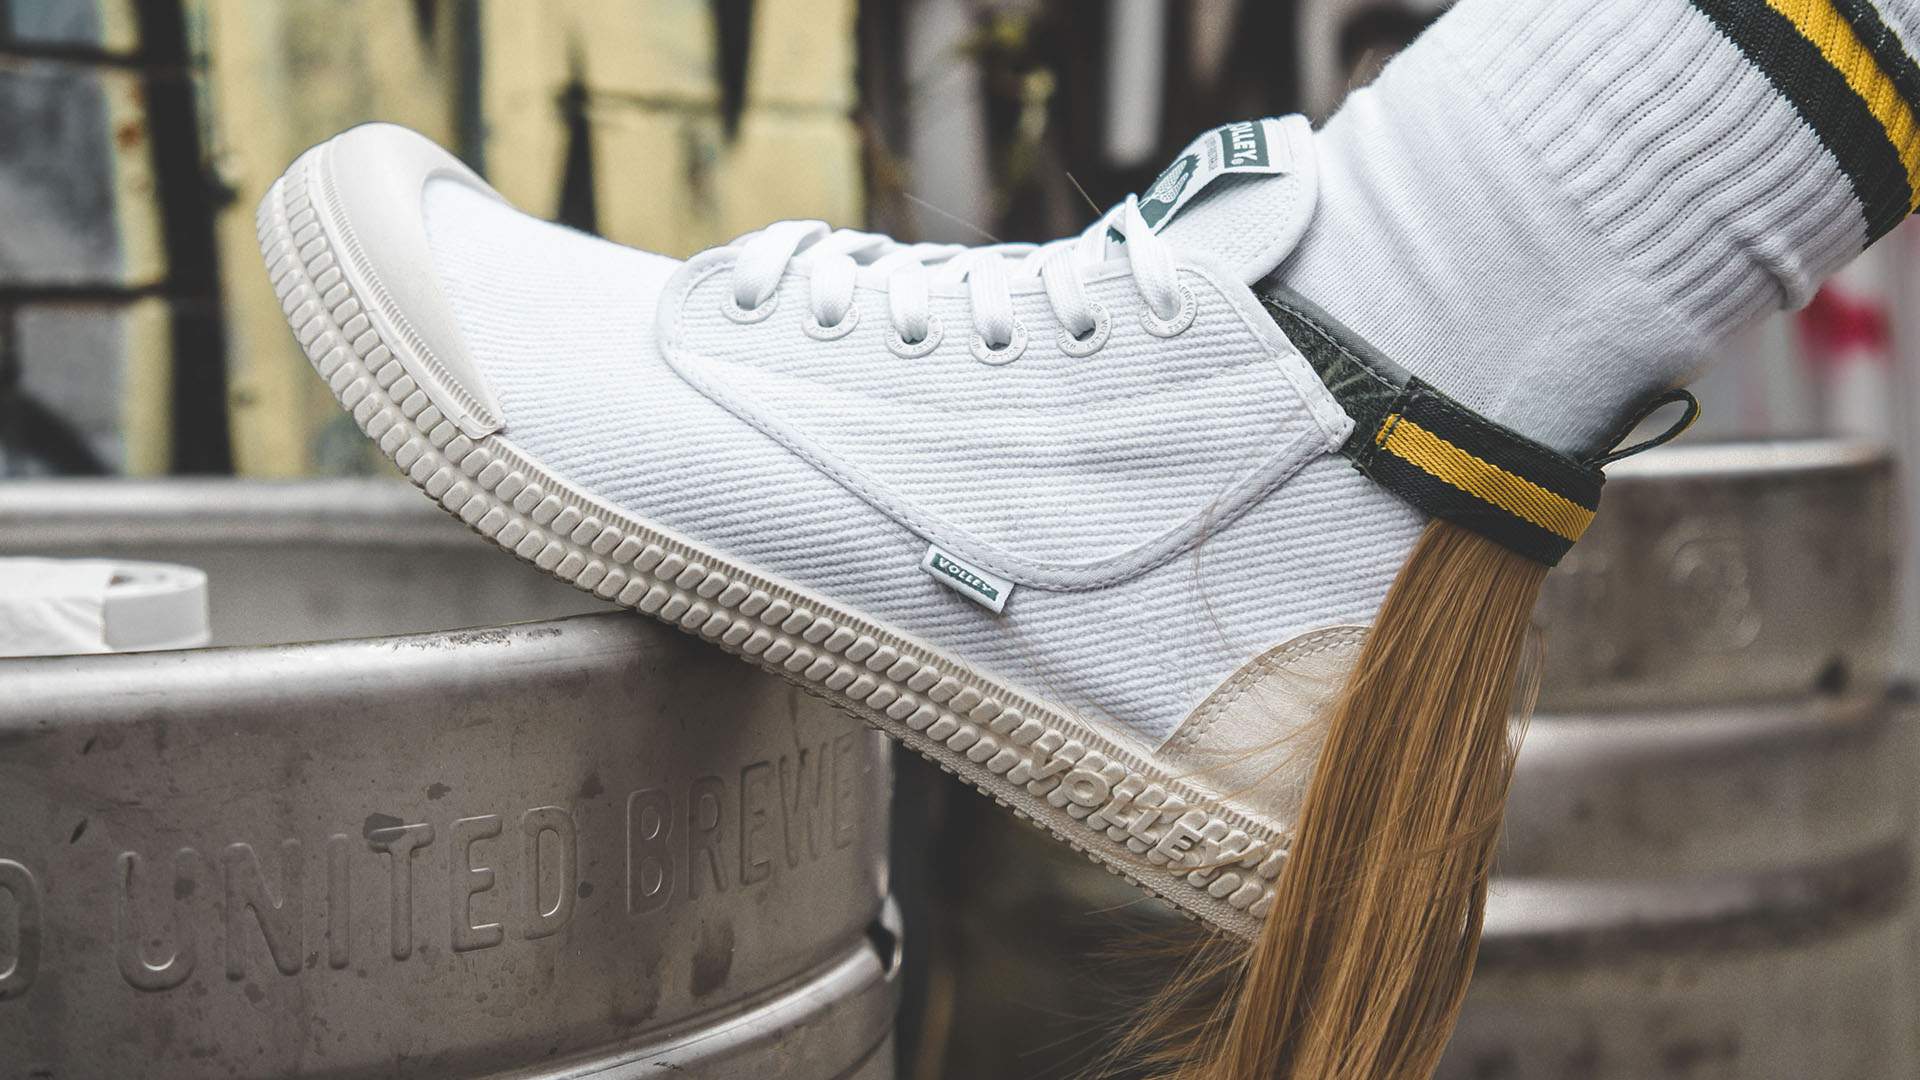 Business in the Front, Party in the Back: Volley Has Just Launched a Limited-Edition Mullet Shoe